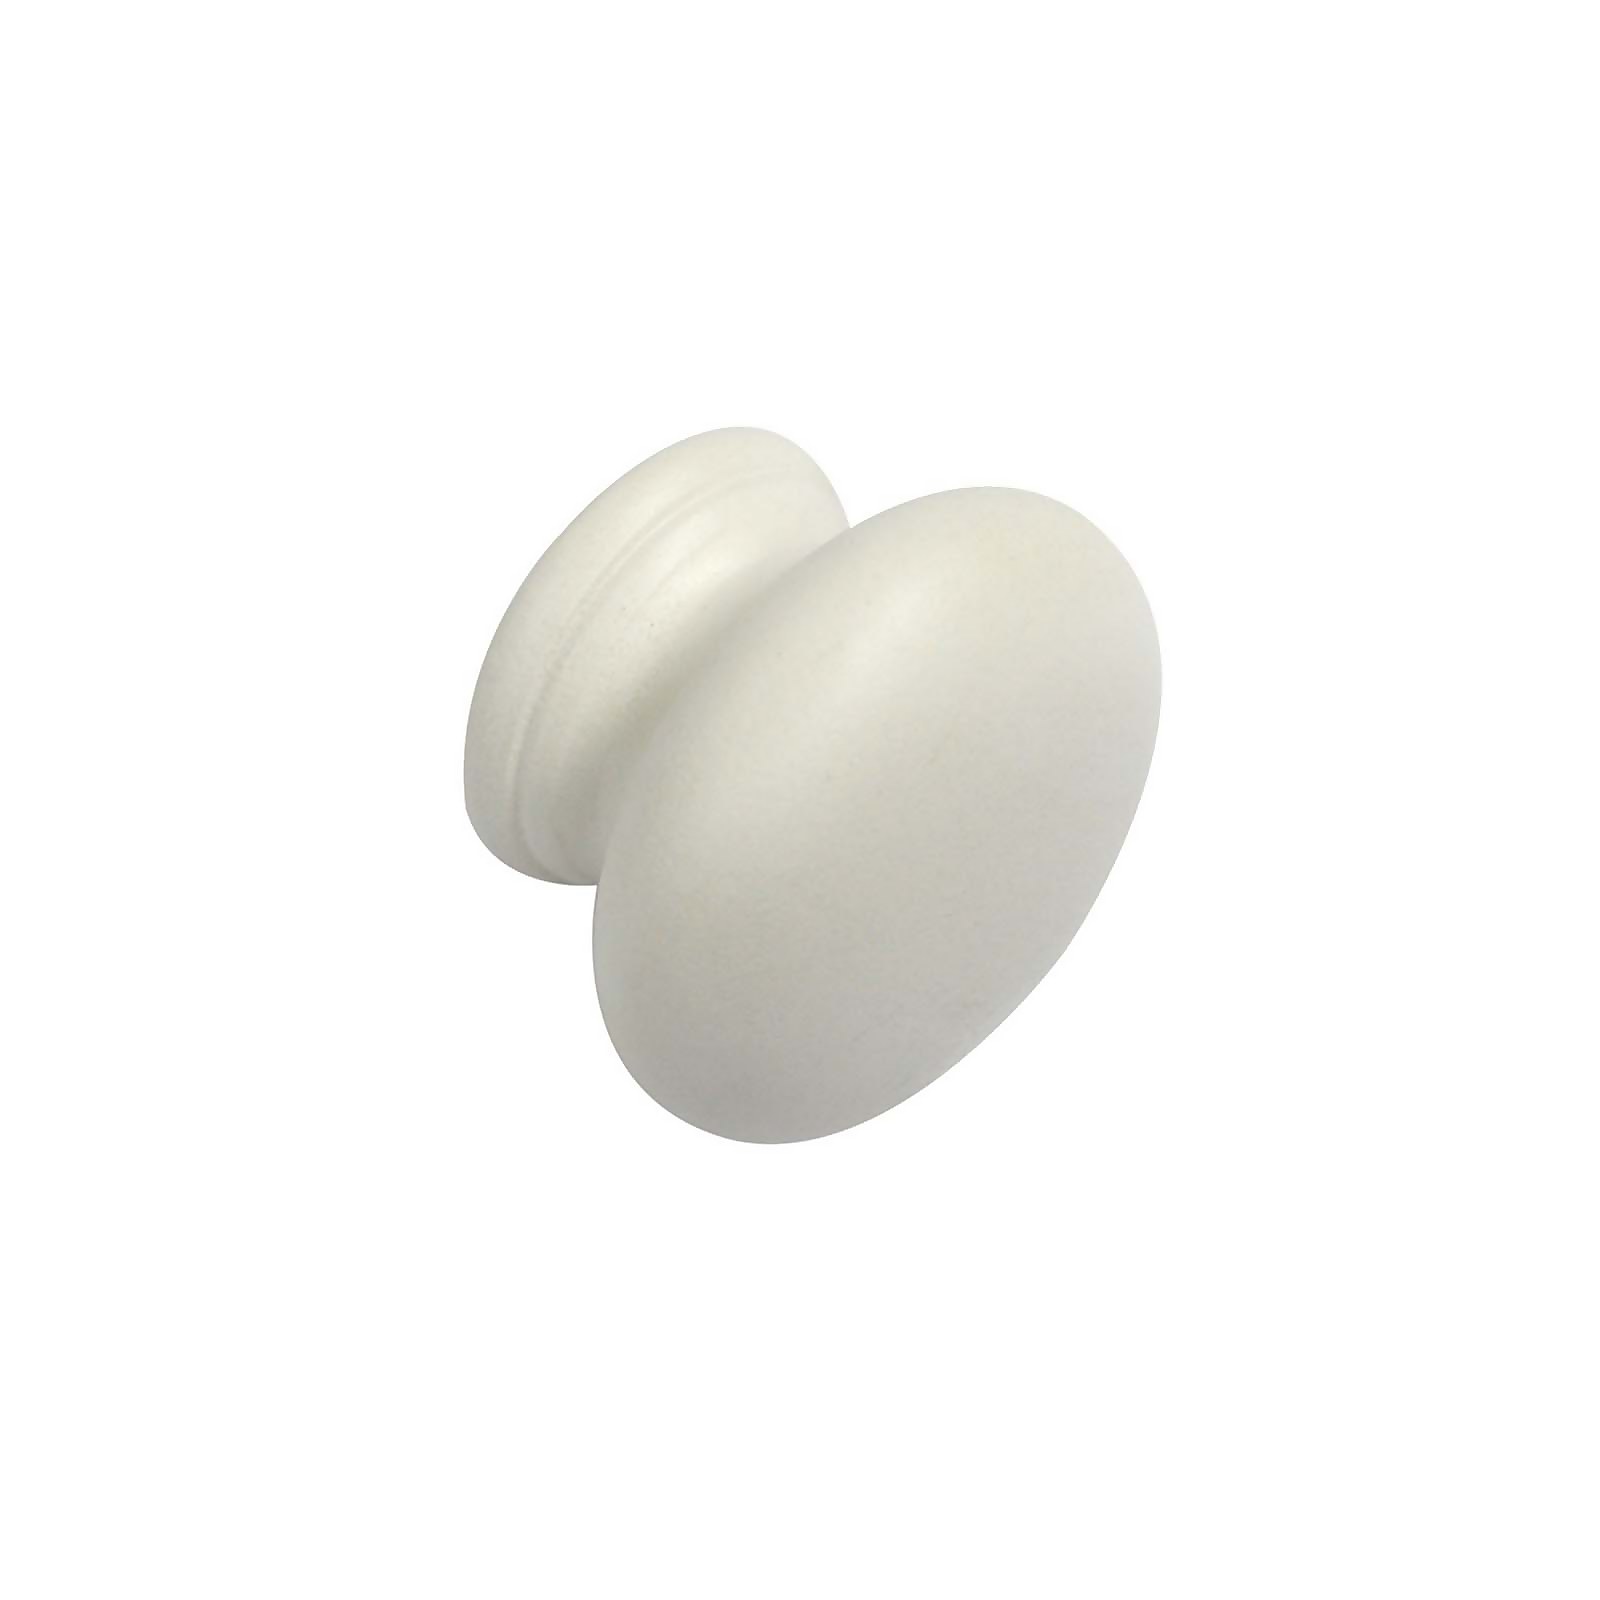 Photo of White 28mm Wooden Cabinet Knob - 2 Pack